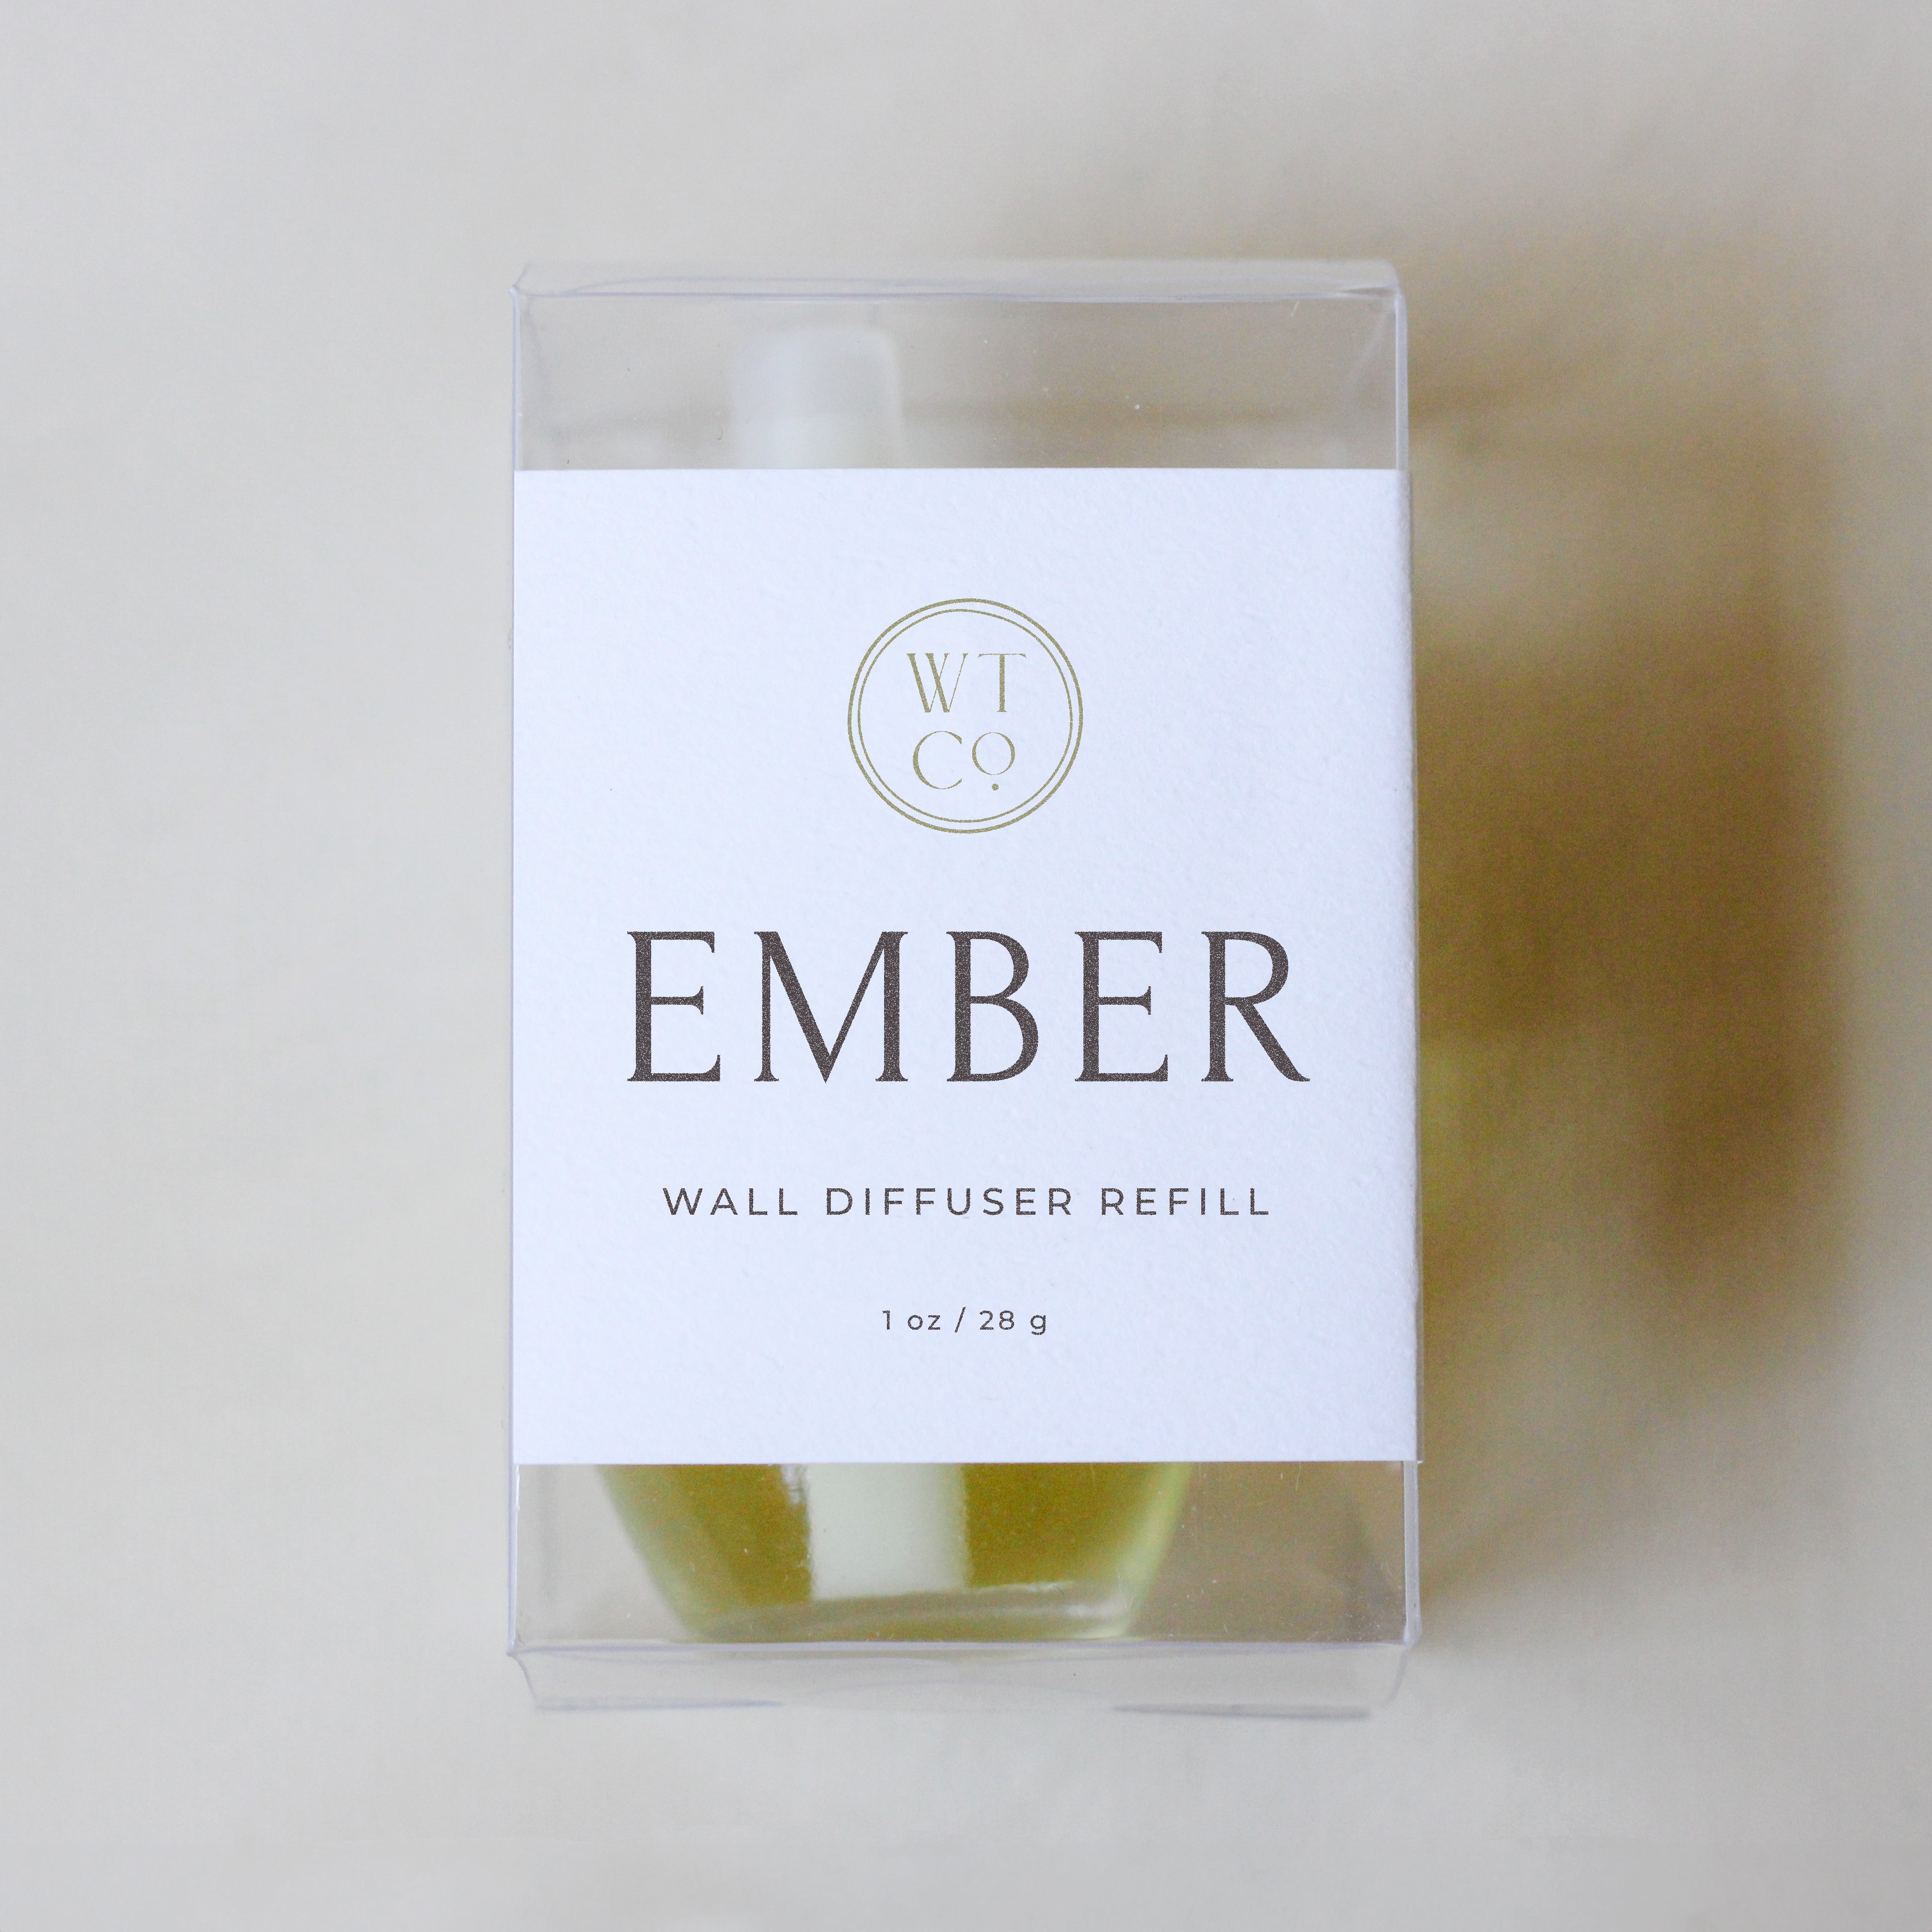 Ember Wall Diffuser Refill | Well-Taylored Co.